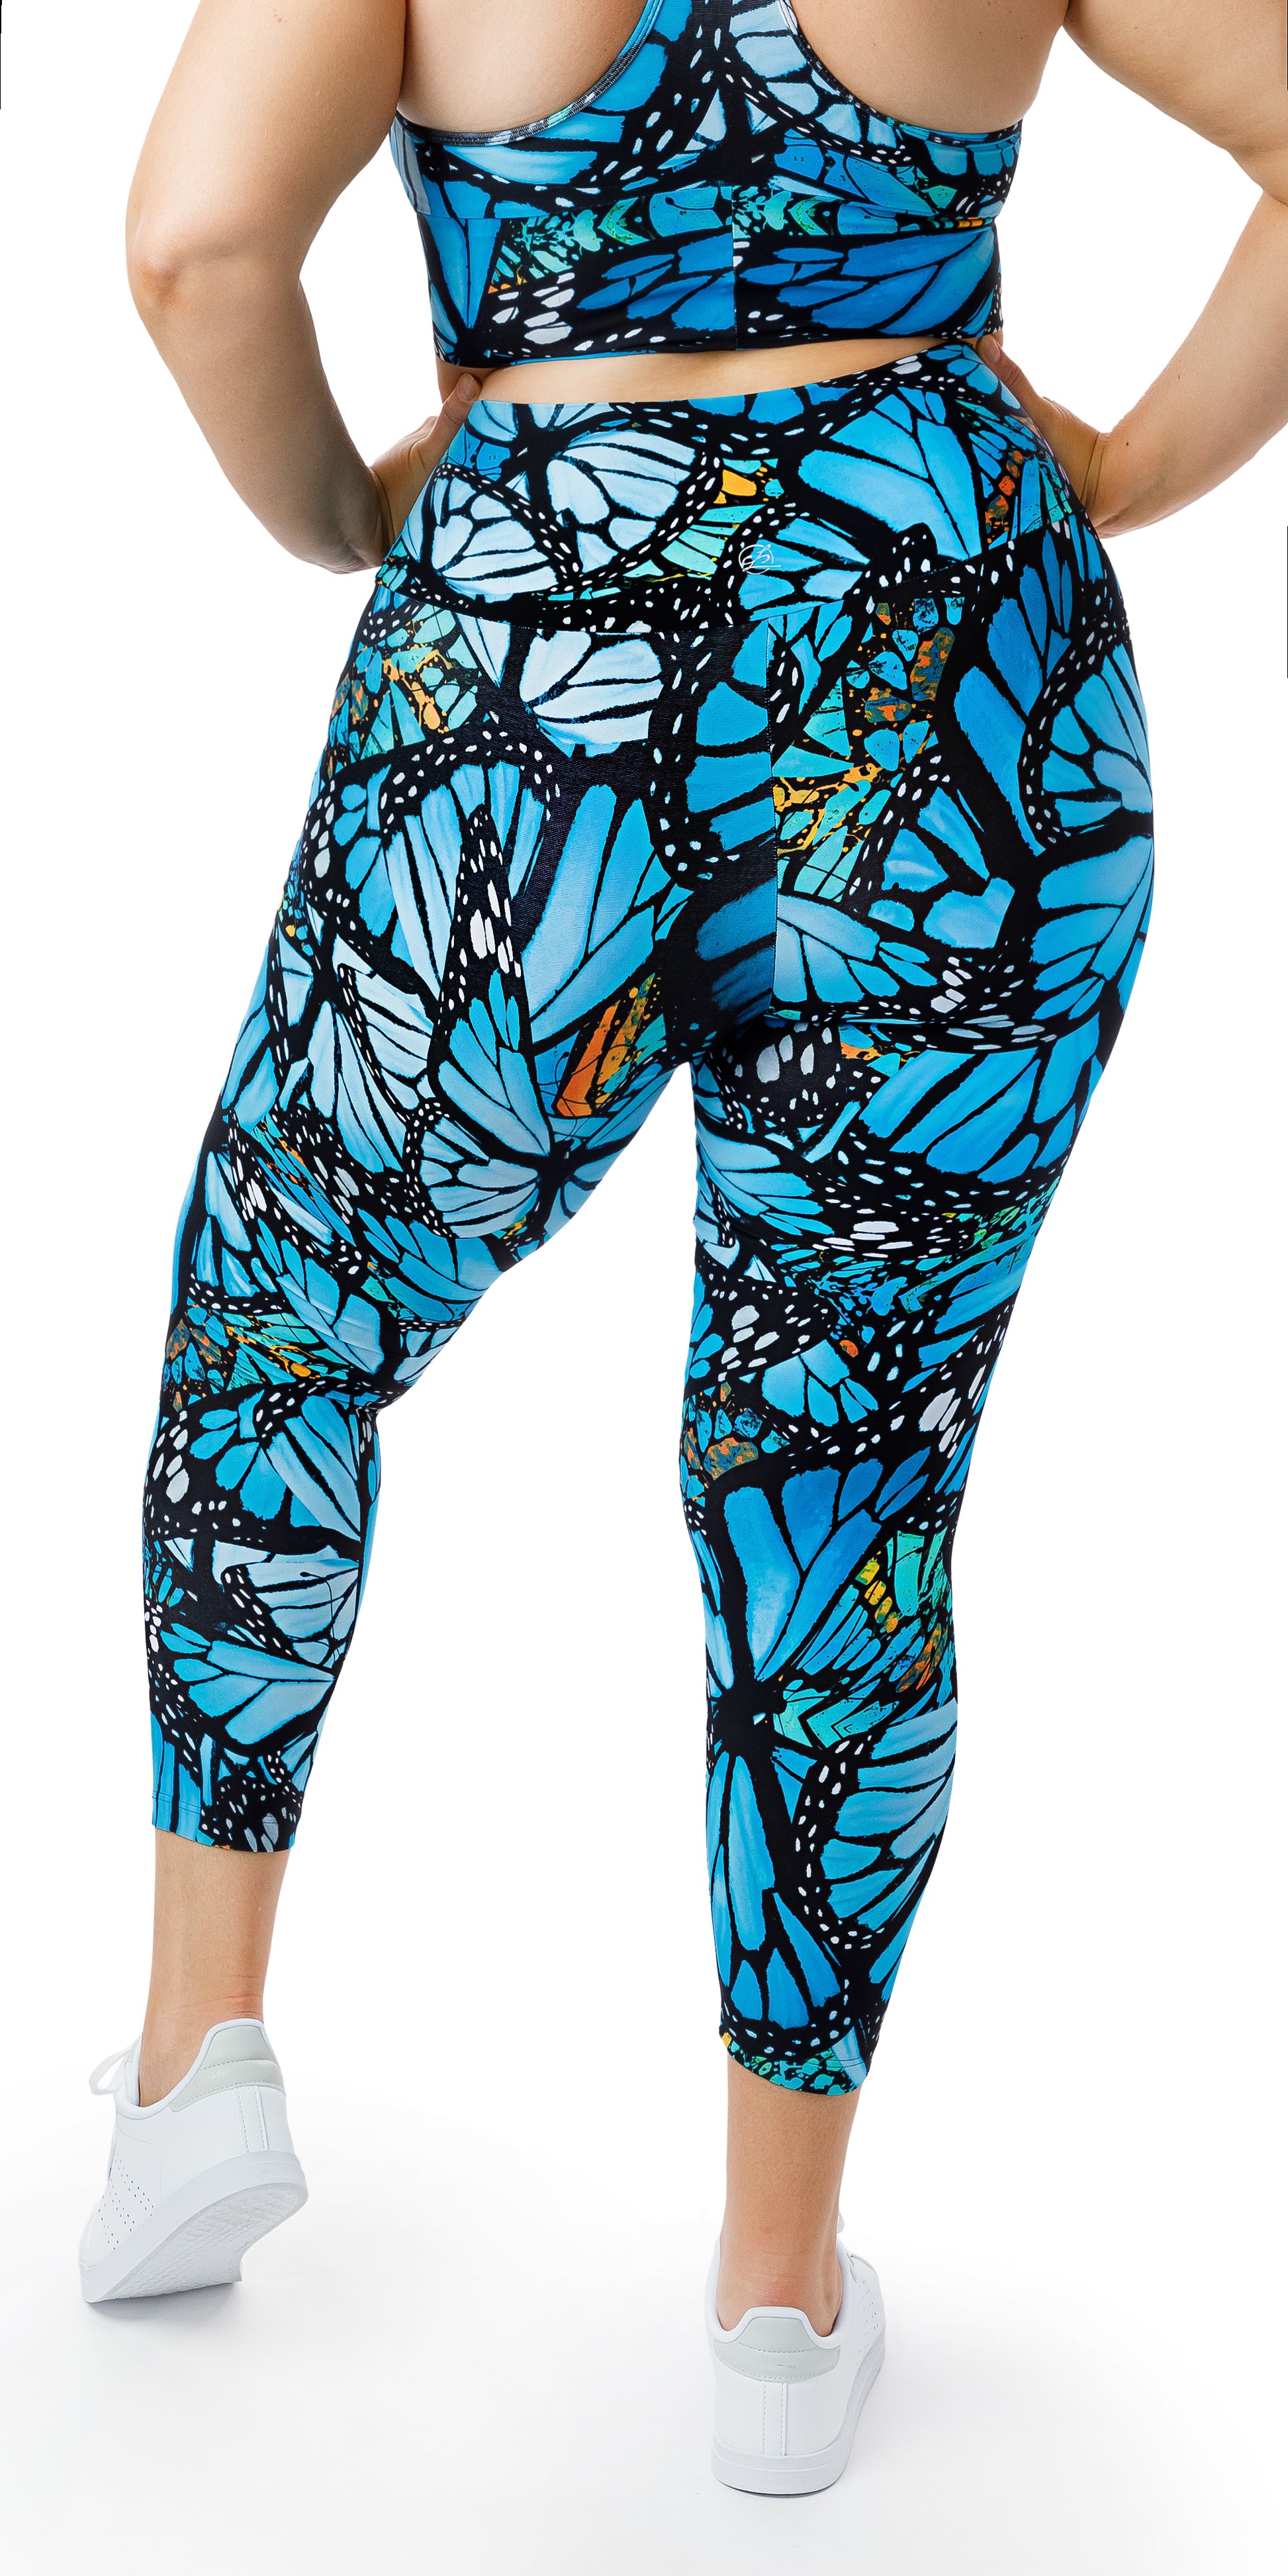 Rear view of girl in blue animal print JH Butterfly Ultra High Waist 7/8 Leggings putting both hands on her waist